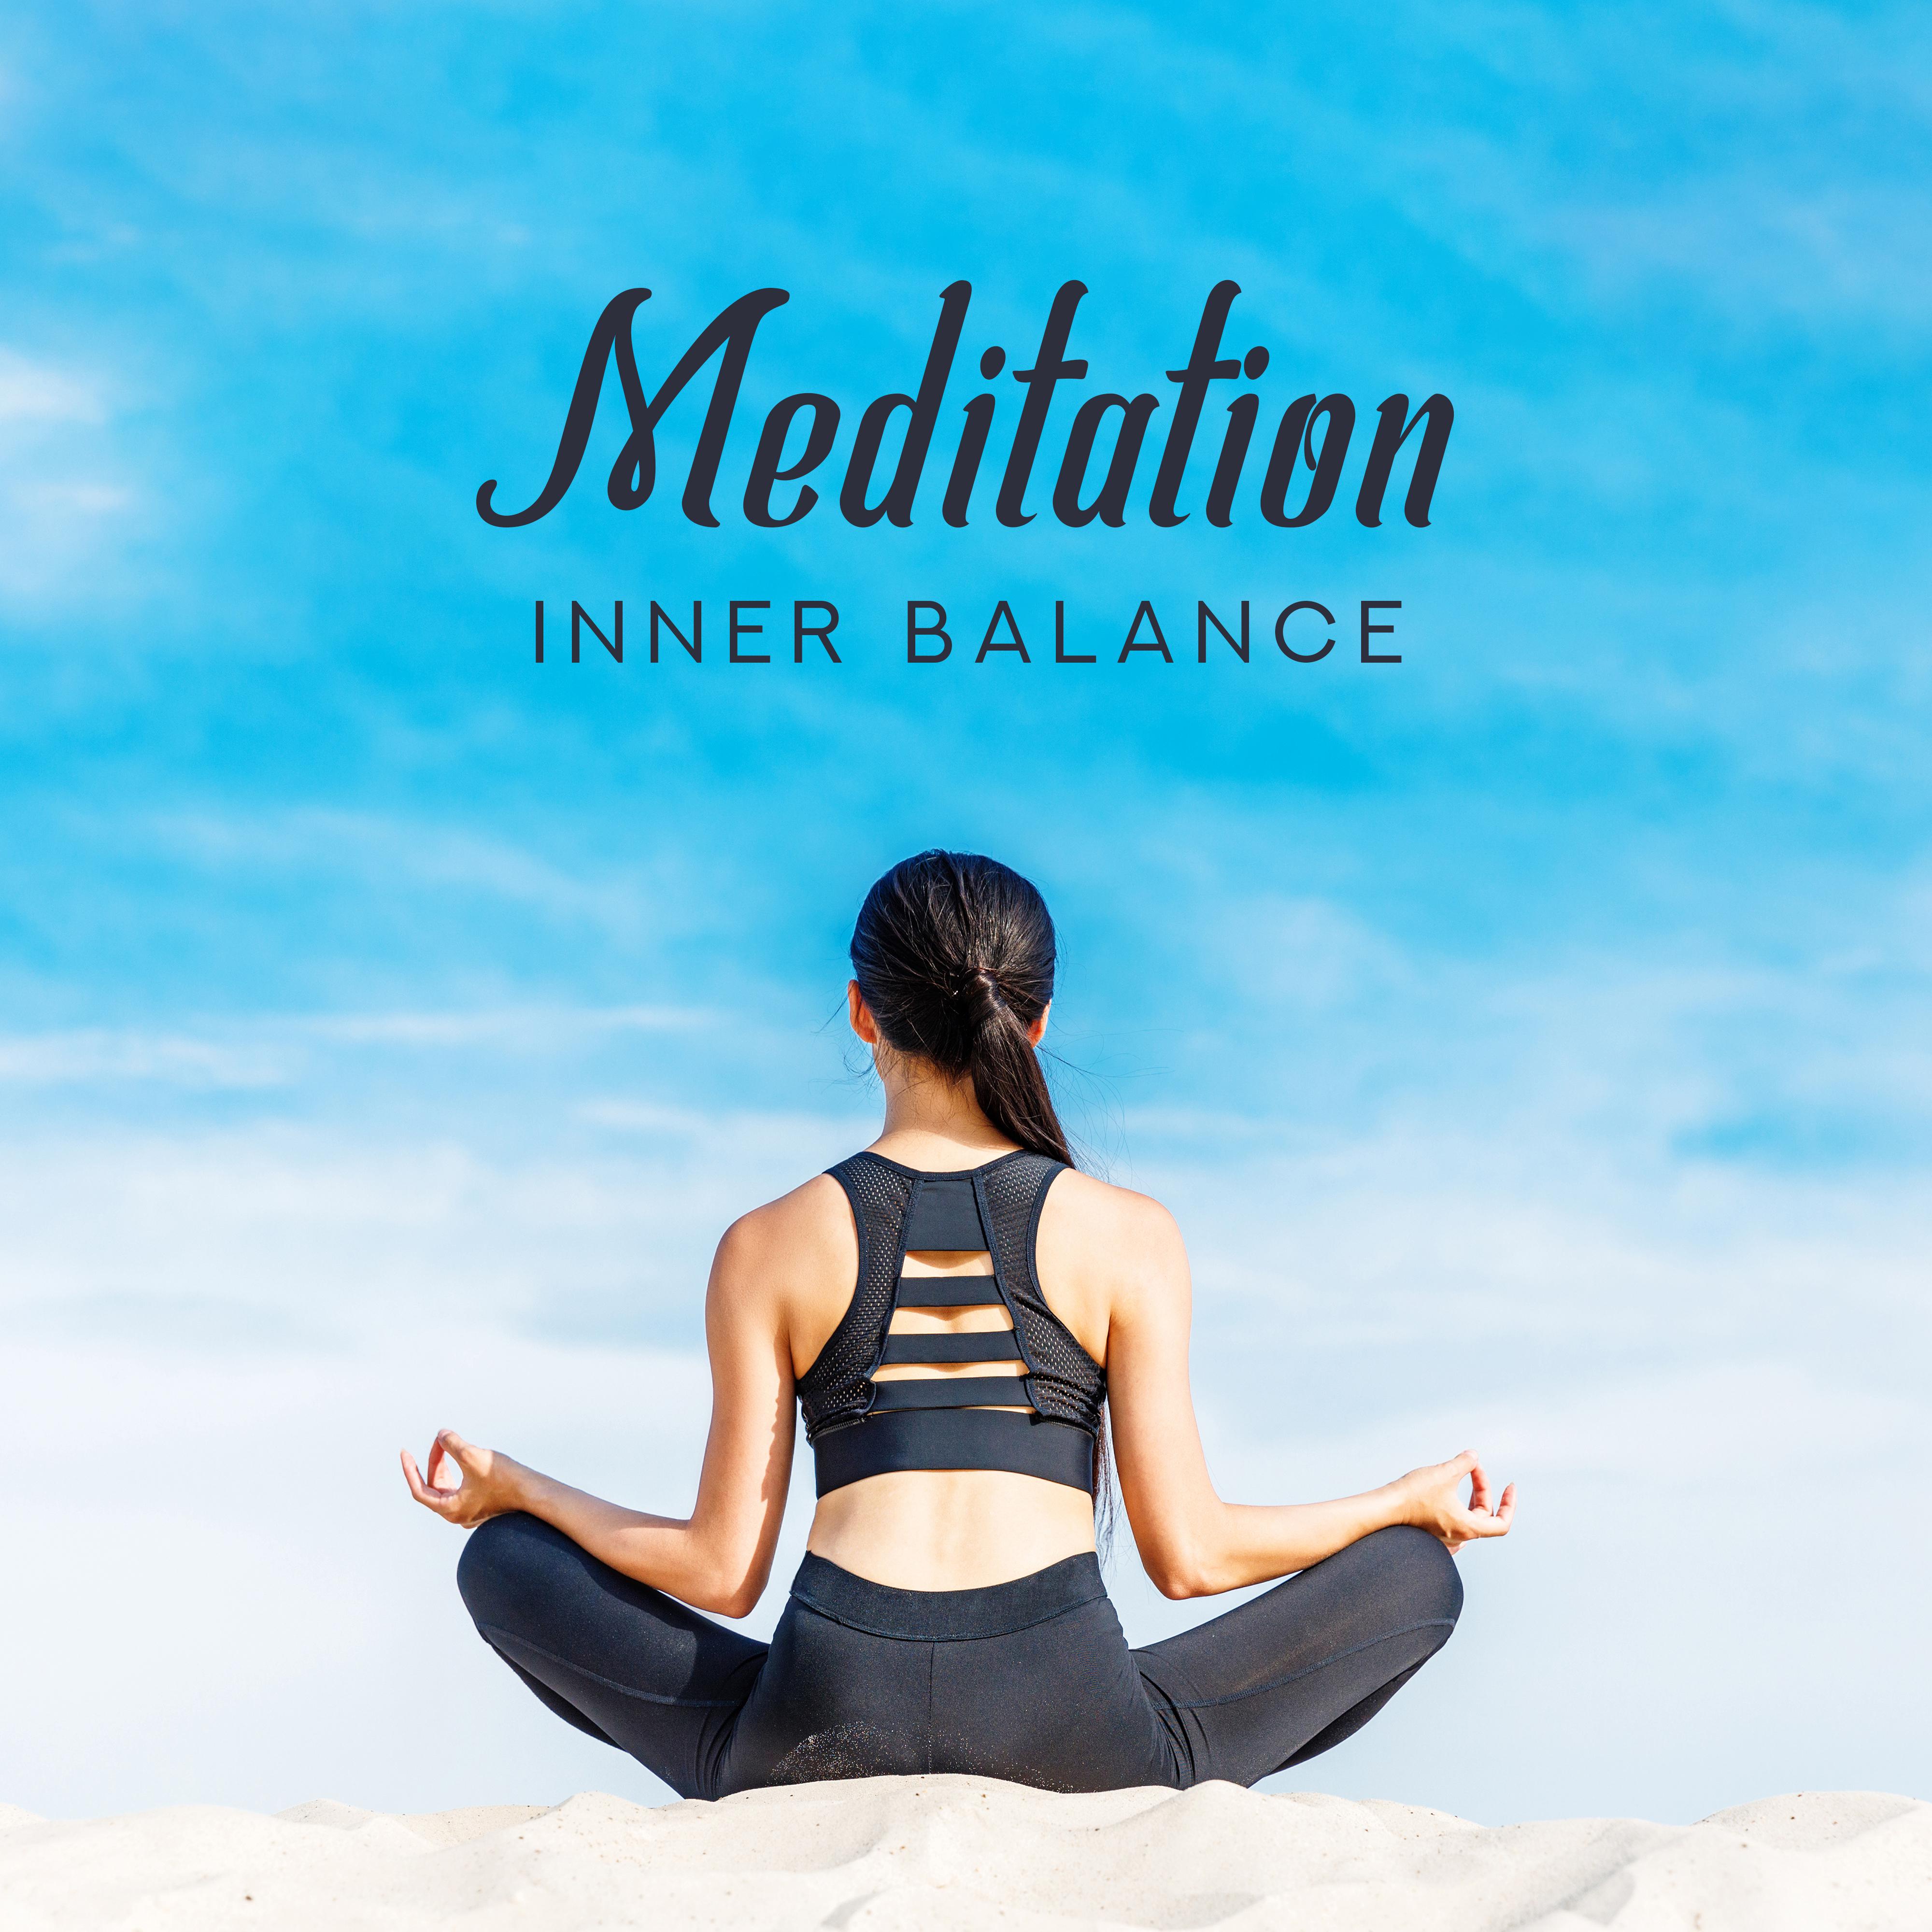 Meditation Inner Balance: 2019 New Age Deep Ambient Music for Best Yoga & Pure Relaxation Experience, Chakra Healing Sounds, Buddha Lounge, Calming Waves